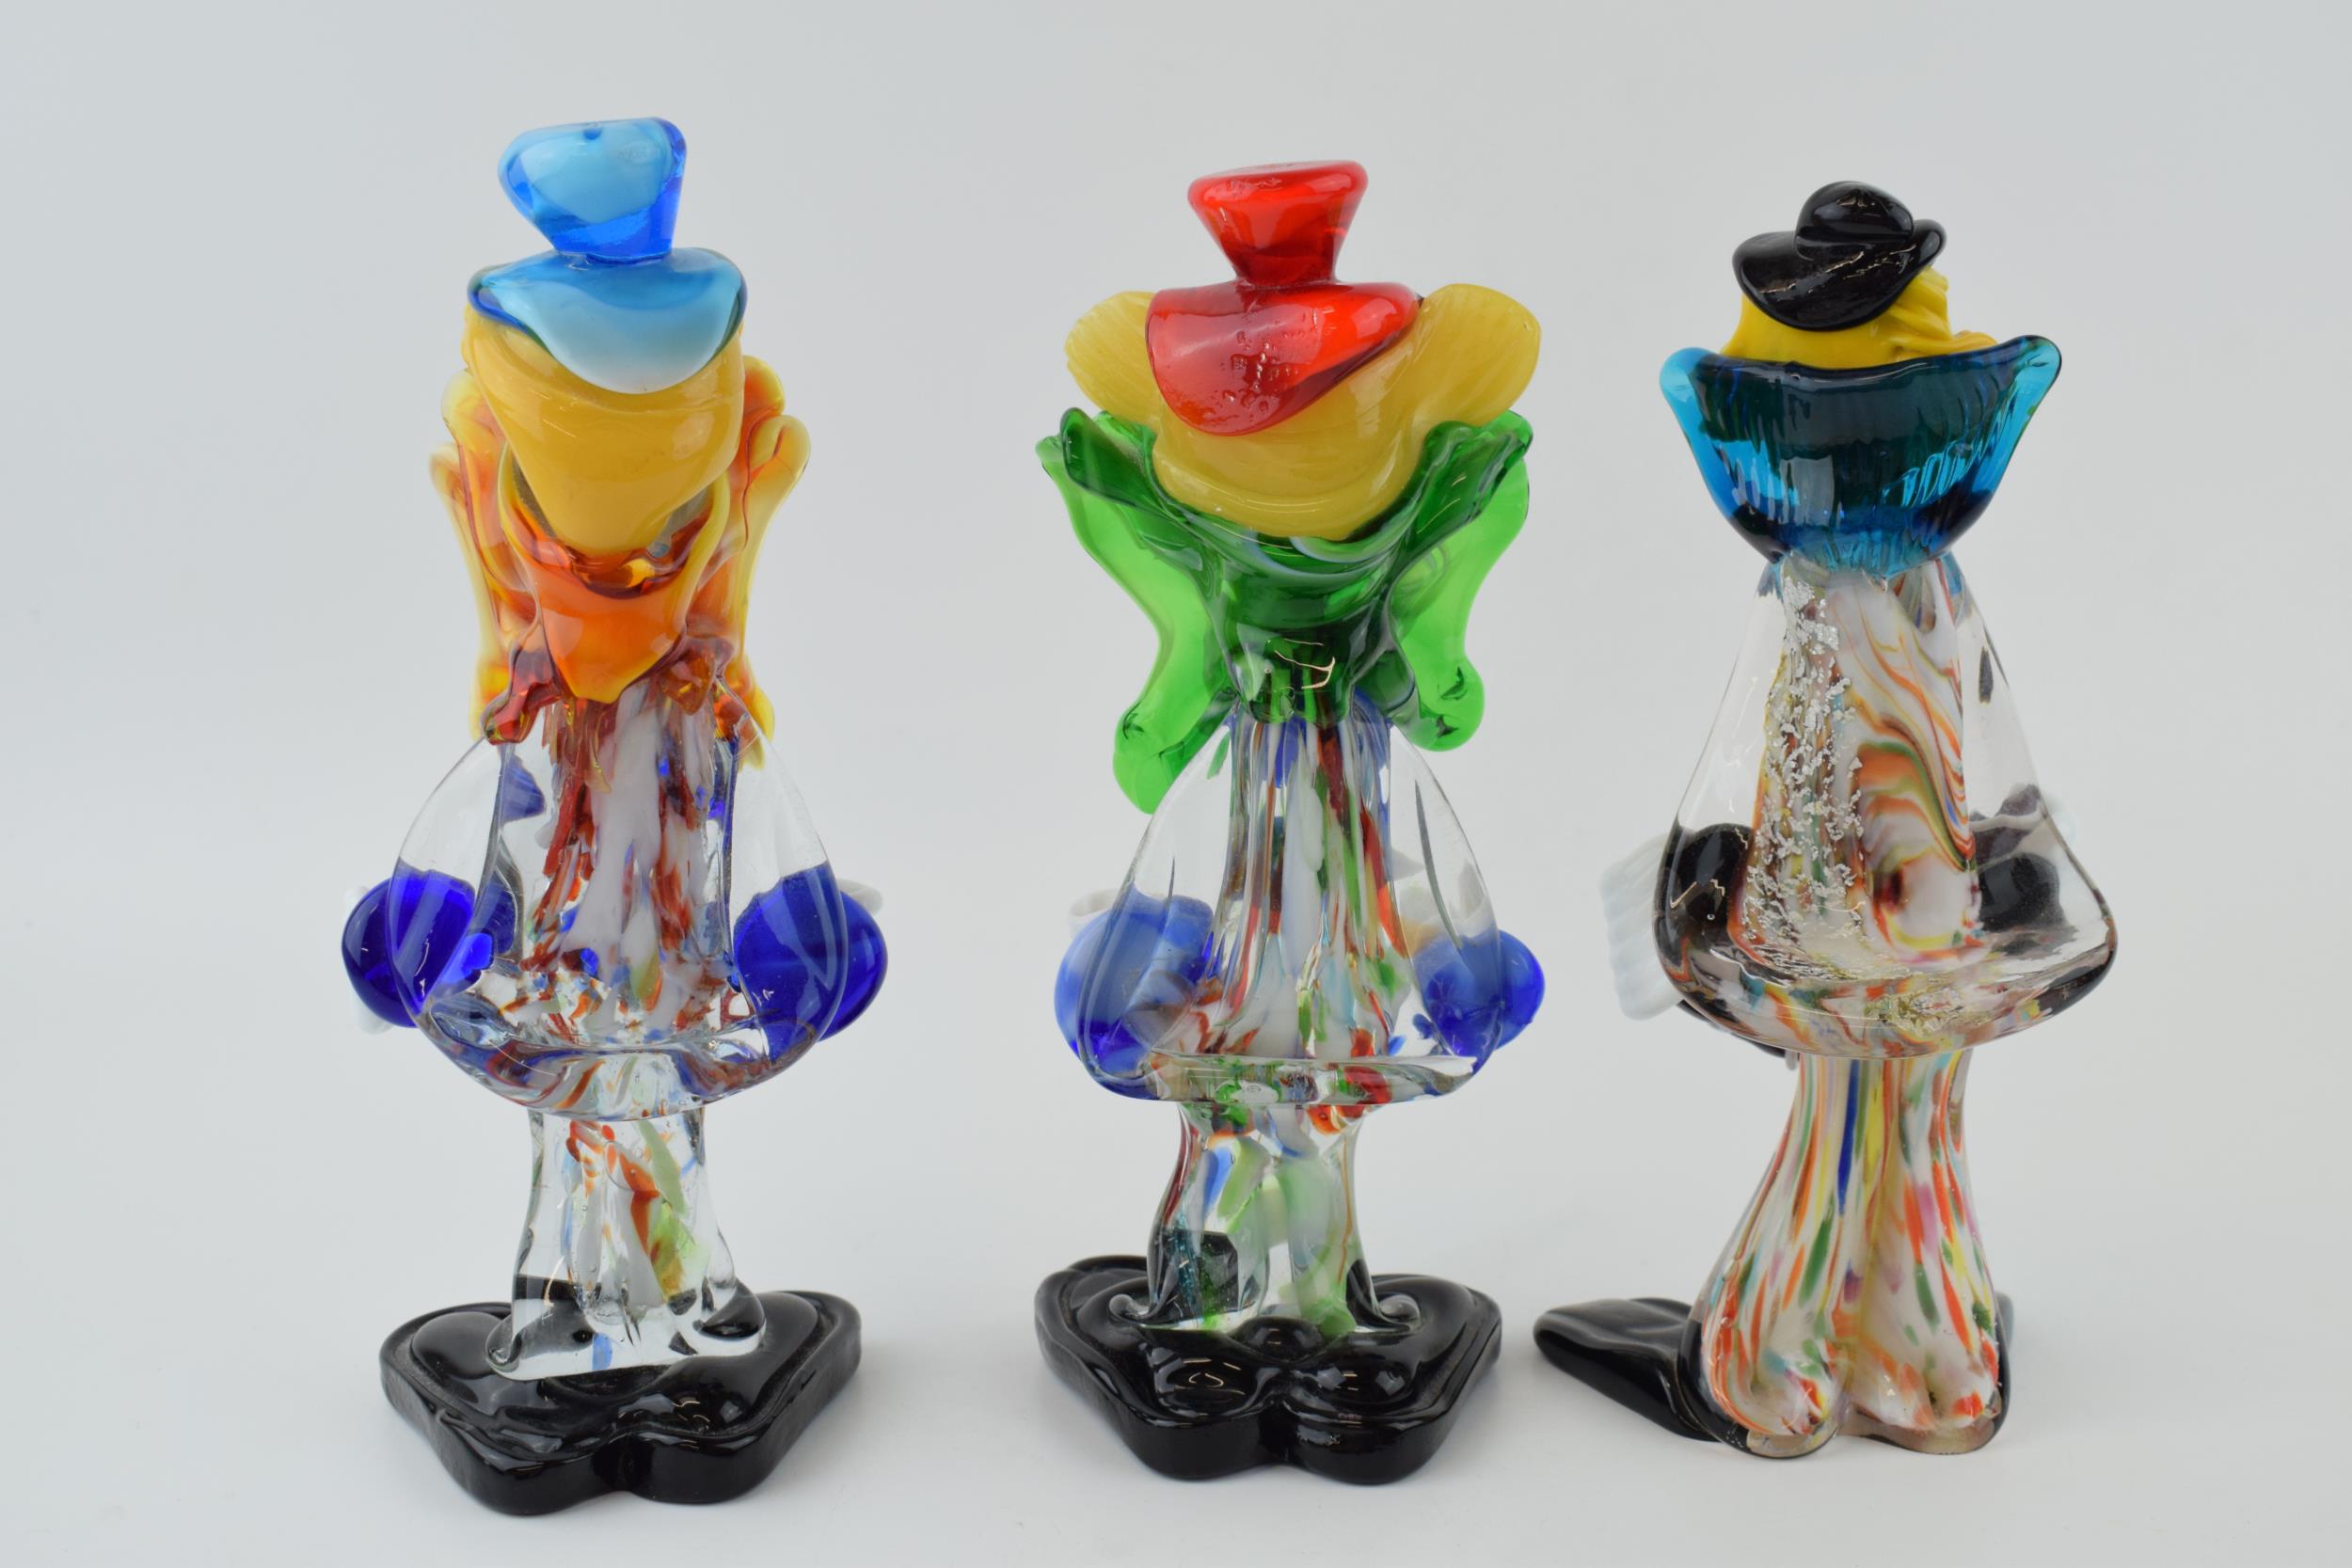 A trio of Murano glass clowns, 22cm tall (3). In good condition with no obvious damage or - Image 2 of 2